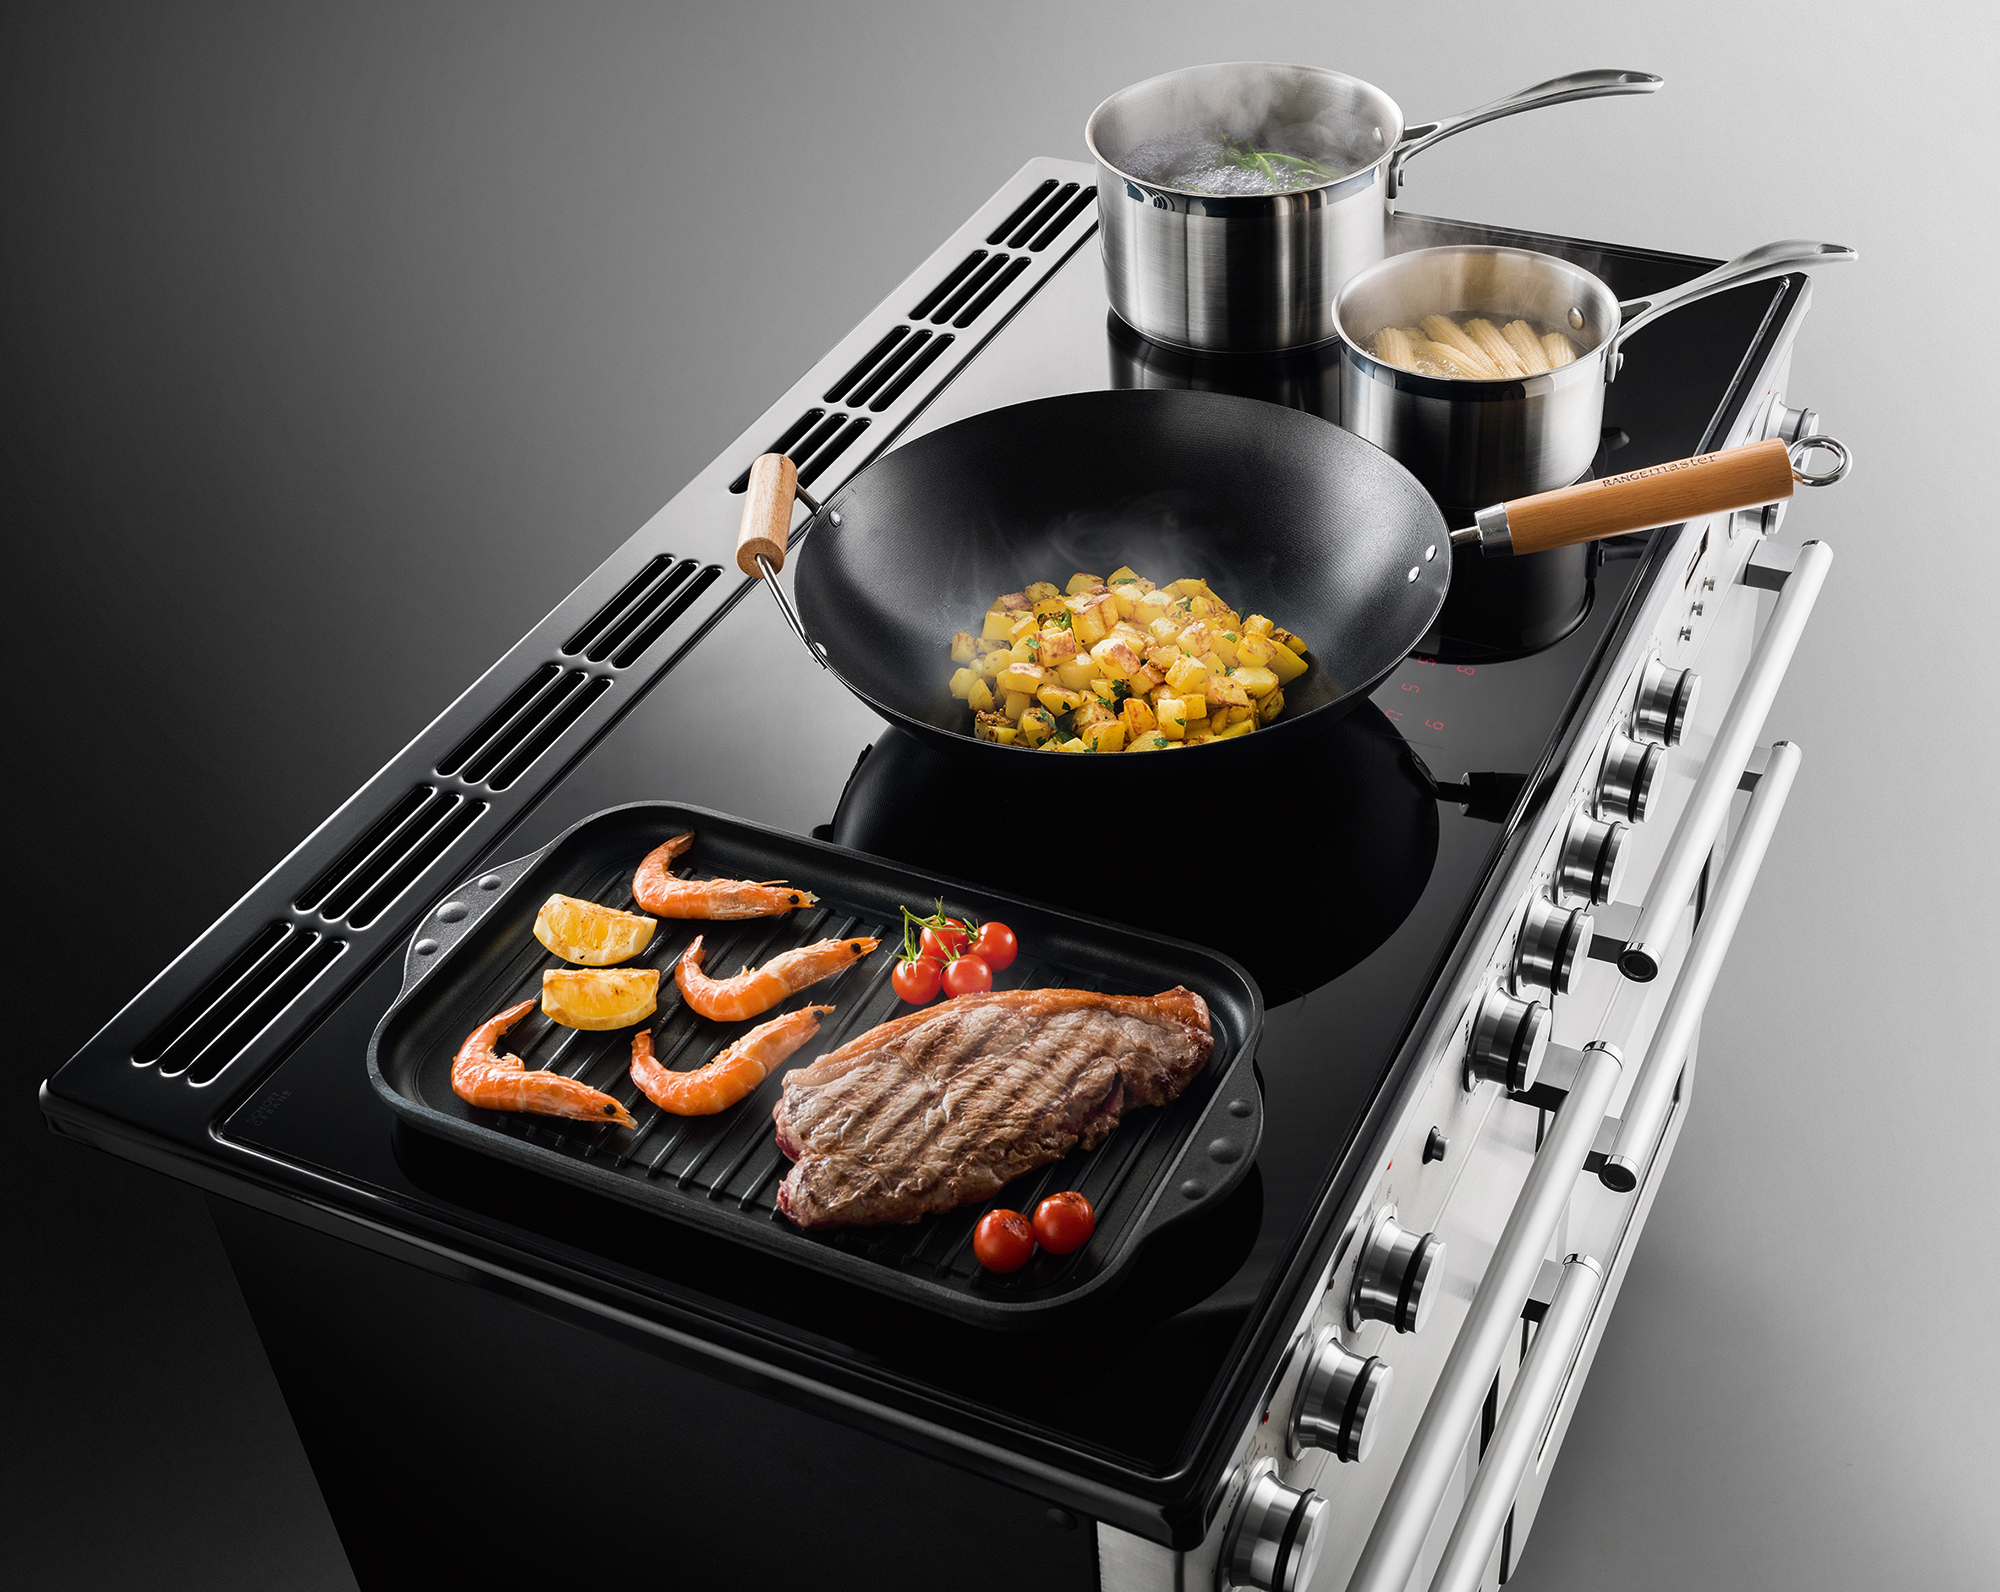 Induction hobs cooking various foods at the same time